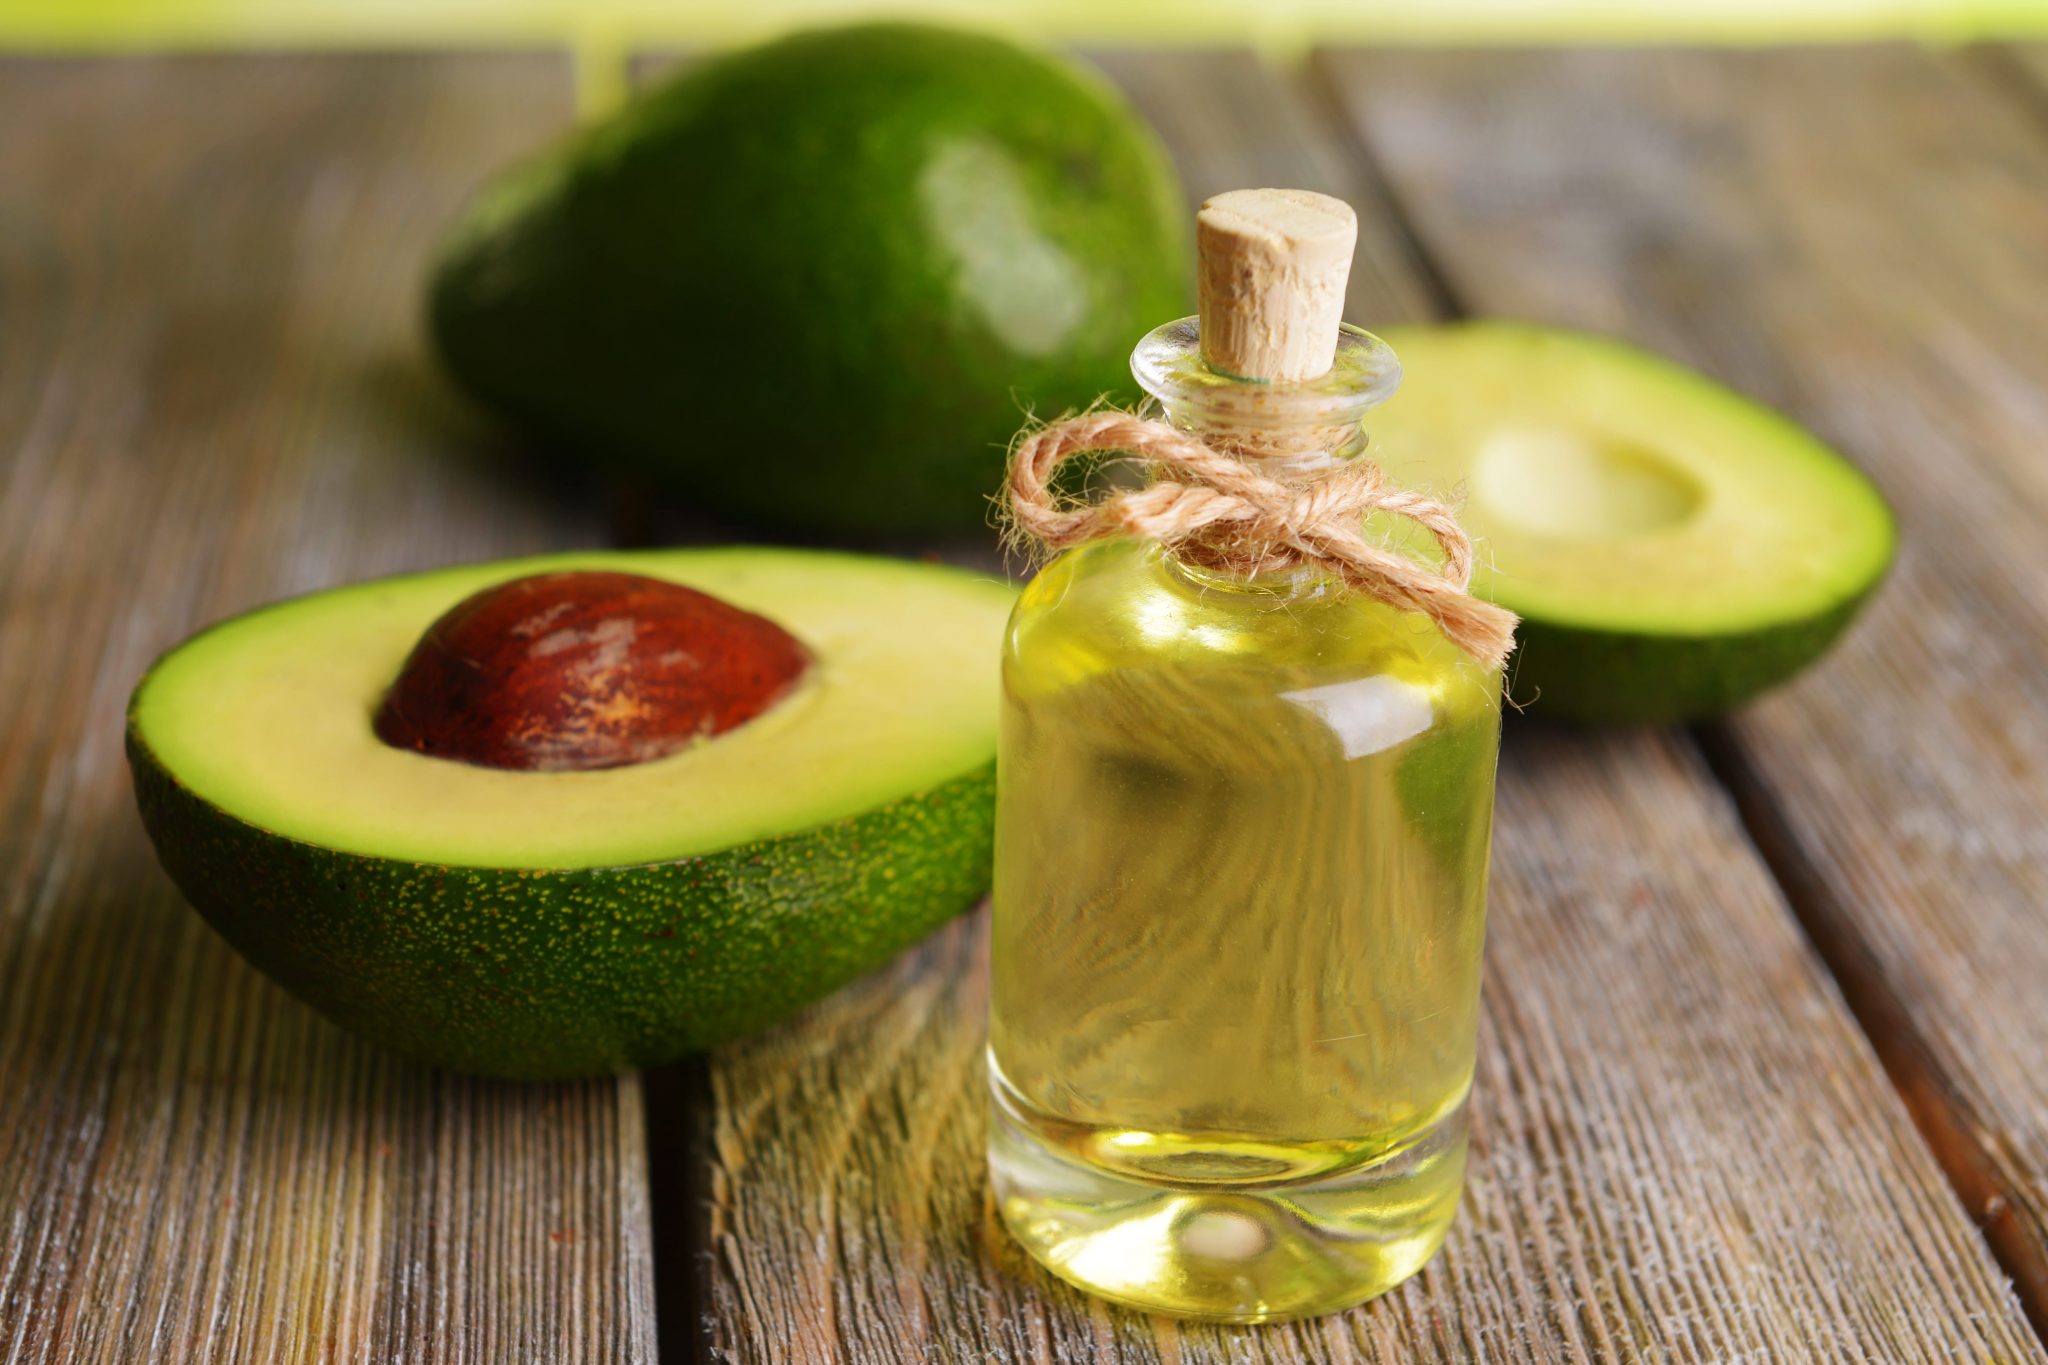 Substitute for avocado oil for hair and skin